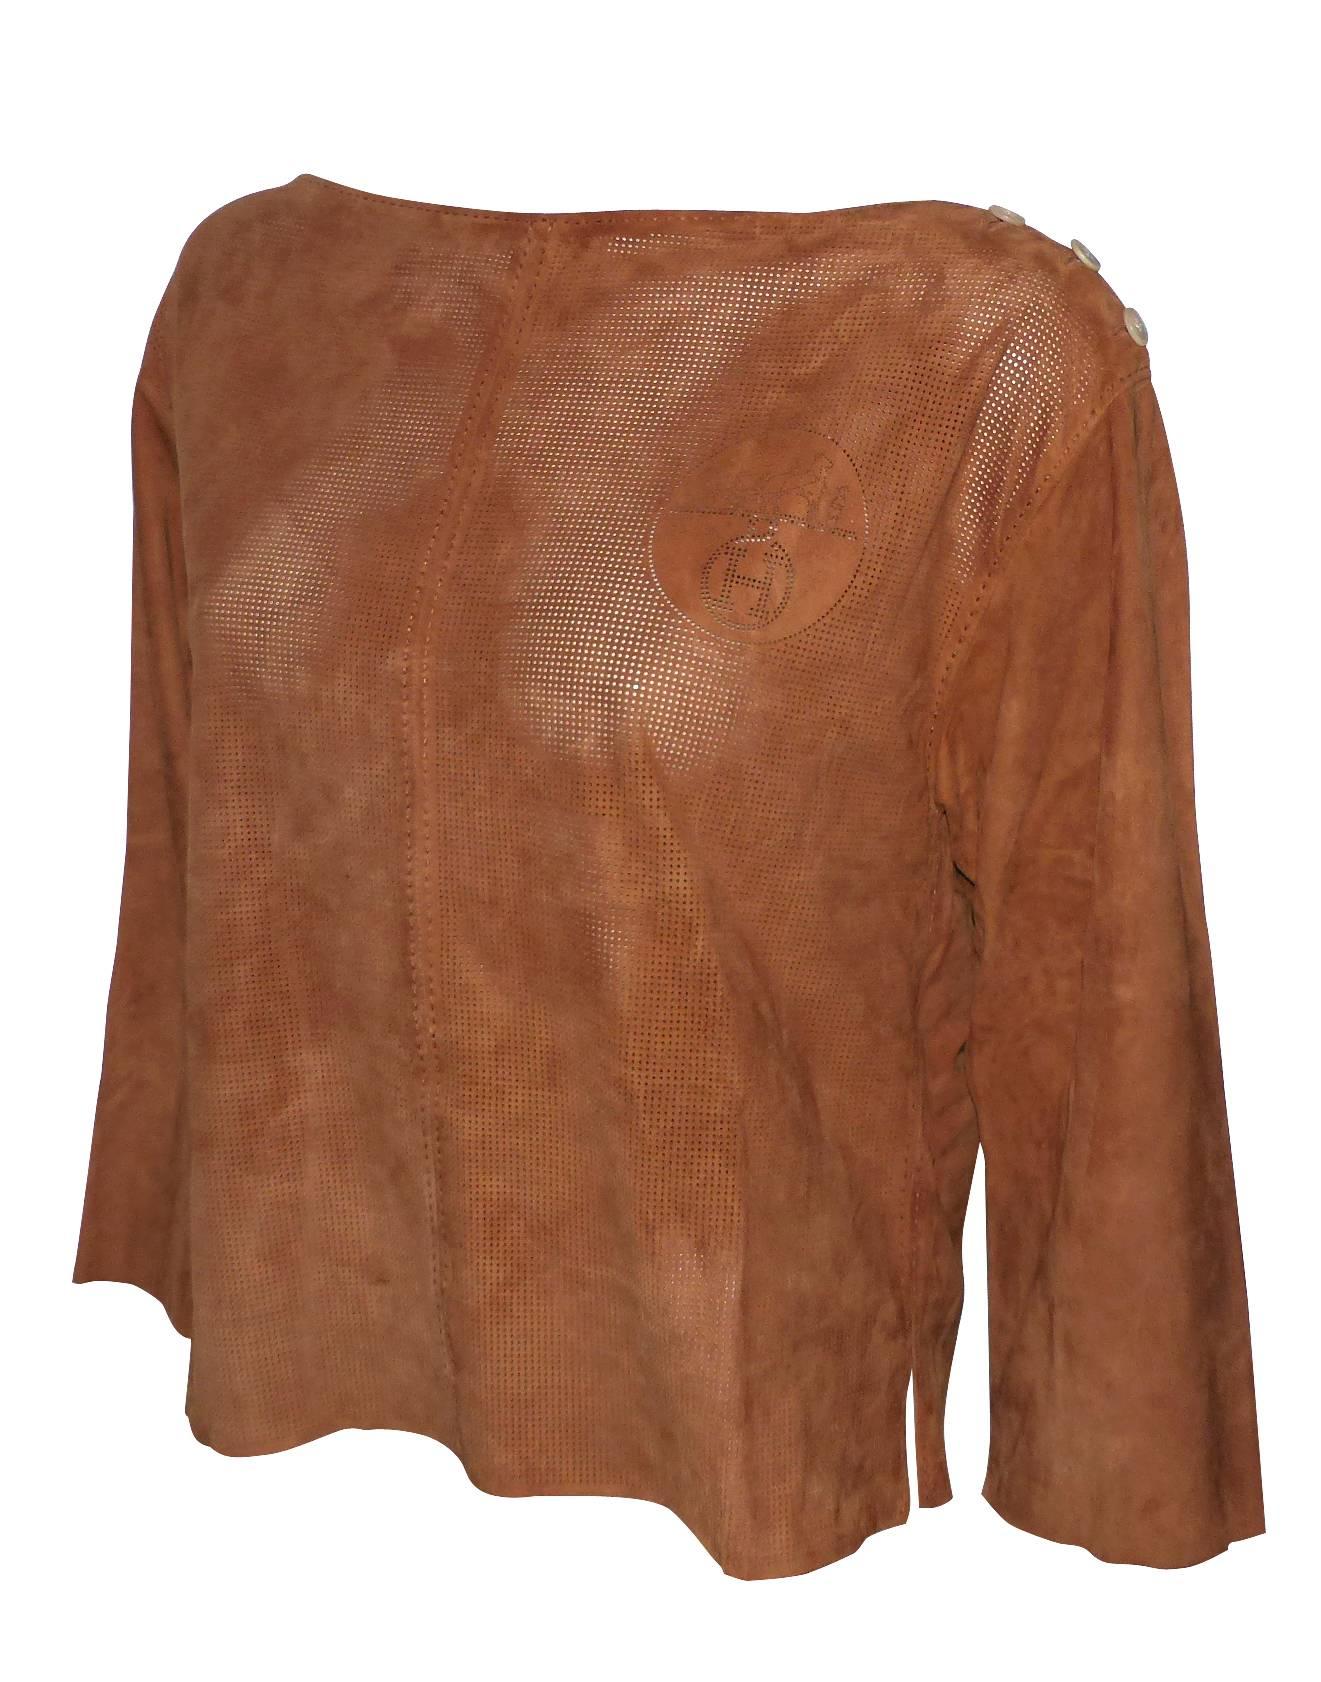 Gorgeous Hermes Tunic Perforated Brown Suede
Shape straight ample neckline
Hermes mother-of-pearl buttons
Sleeves 3/4
Mint condition - Worn 1 time
it is rated 36 french size
but suitable for a 38 and 40 
Please look at the dimensions : 
Overall